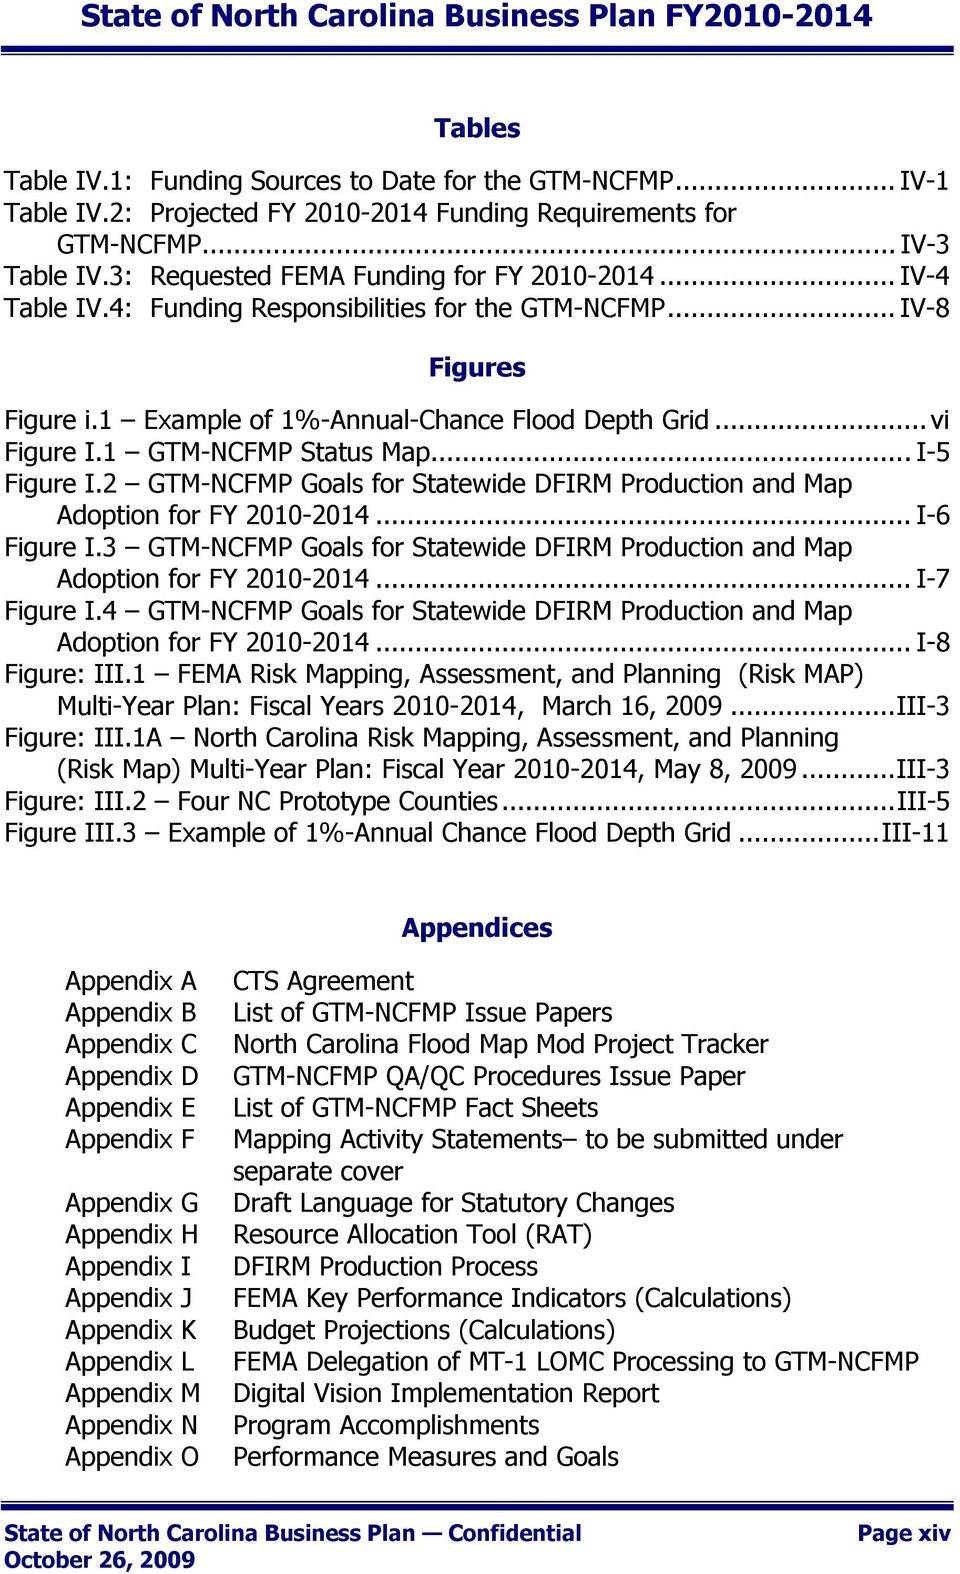 2 GTM-NCFMP Goals for Statewide DFIRM Production and Map Adoption for FY 2010-2014... I-6 Figure I.3 GTM-NCFMP Goals for Statewide DFIRM Production and Map Adoption for FY 2010-2014... I-7 Figure I.